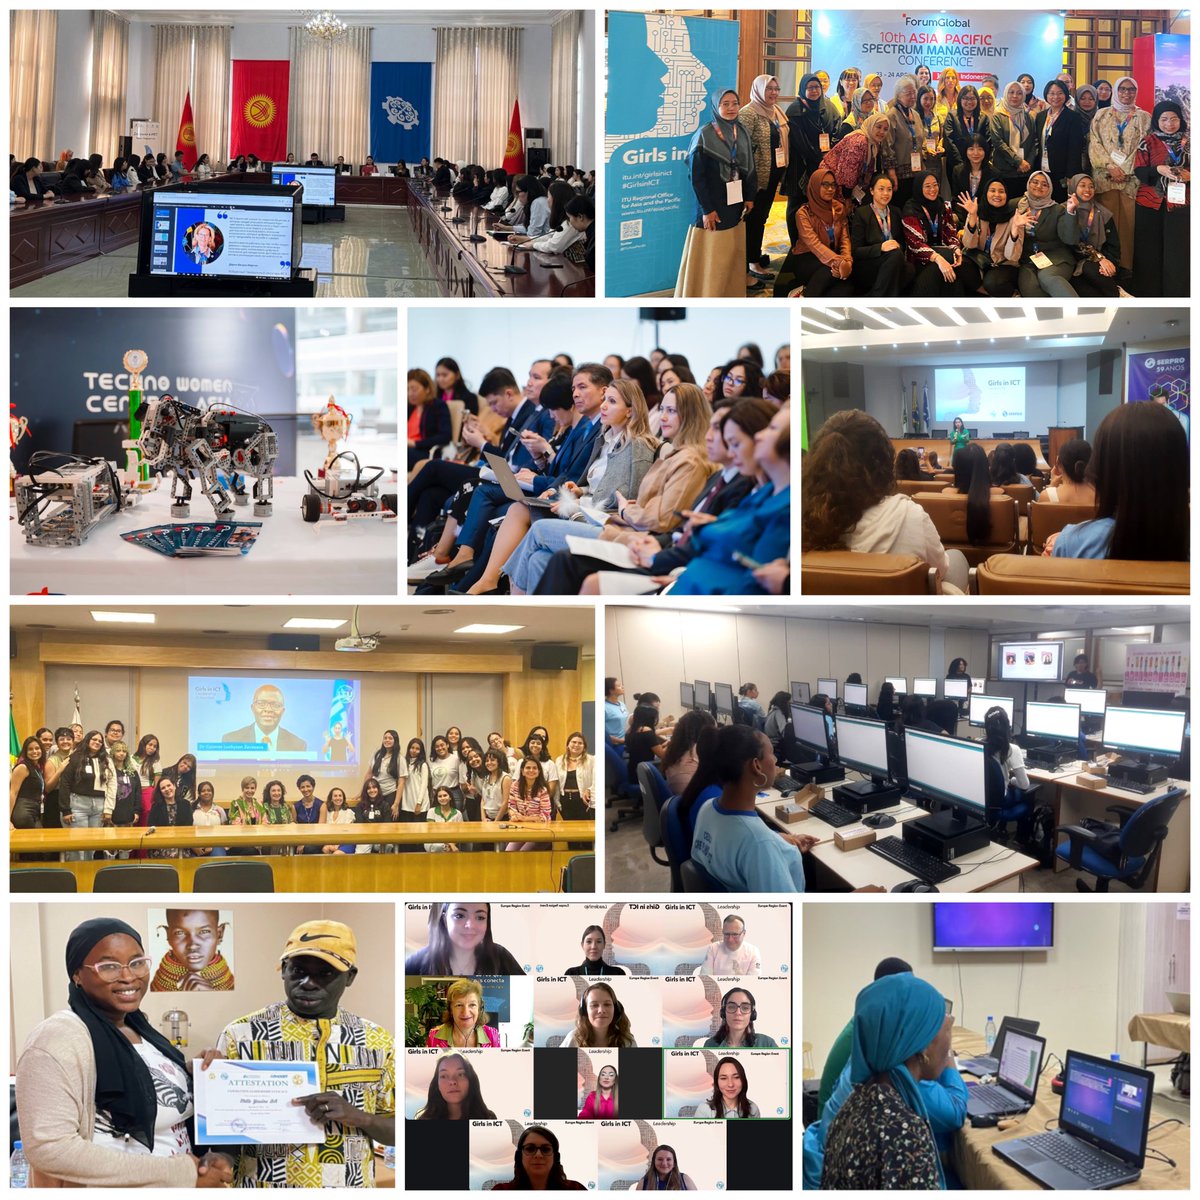 Great to see so many events taking place around the world to celebrate #GirlsinICT Day and encourage the future leaders in tech! Keep an eye on the website - there are more events to come! itu.int/women-and-girl…